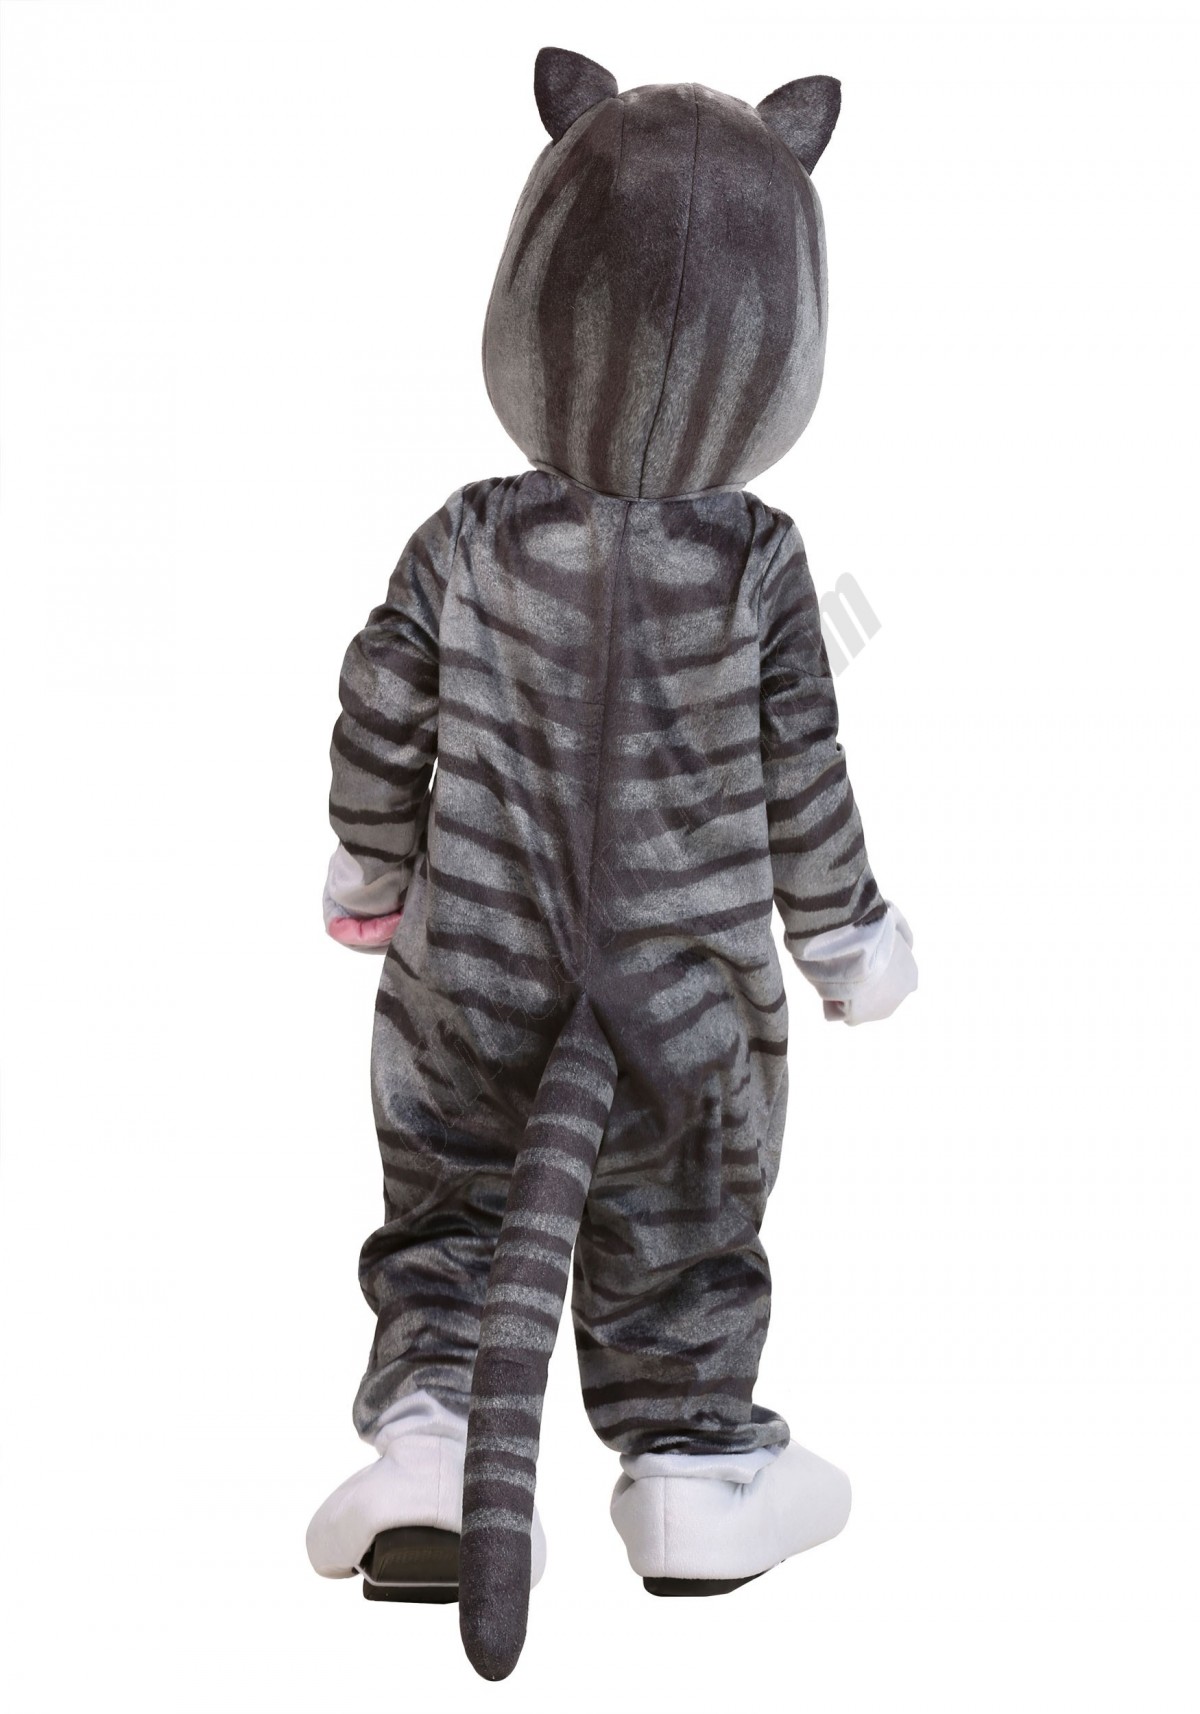 Curious Cat Costume For Toddlers Promotions - -1